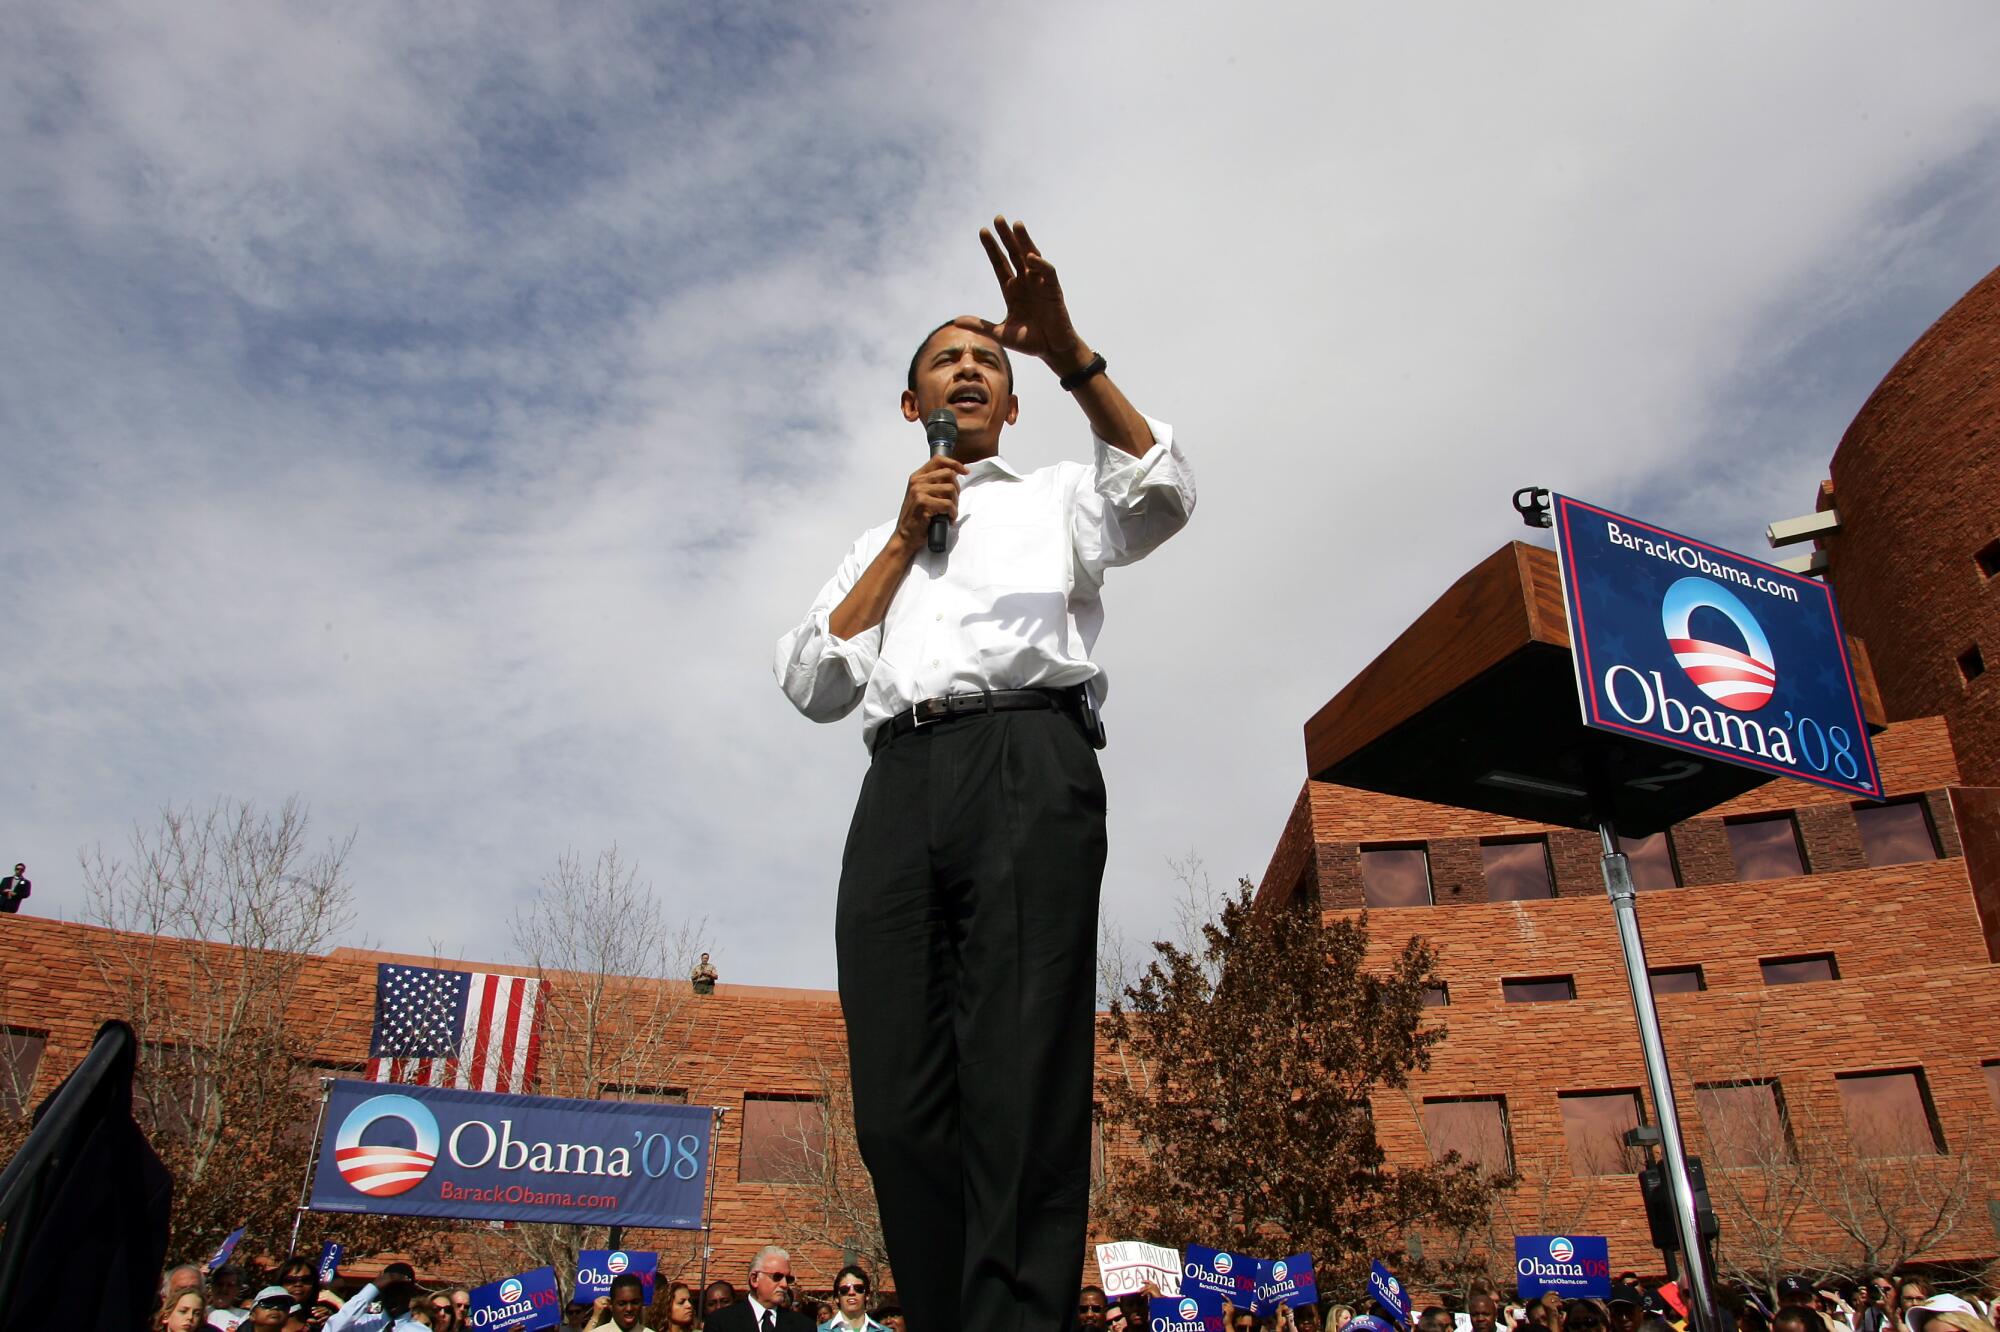 Barack Obama speaks at a campaign stop in Las Vegas in February 2007